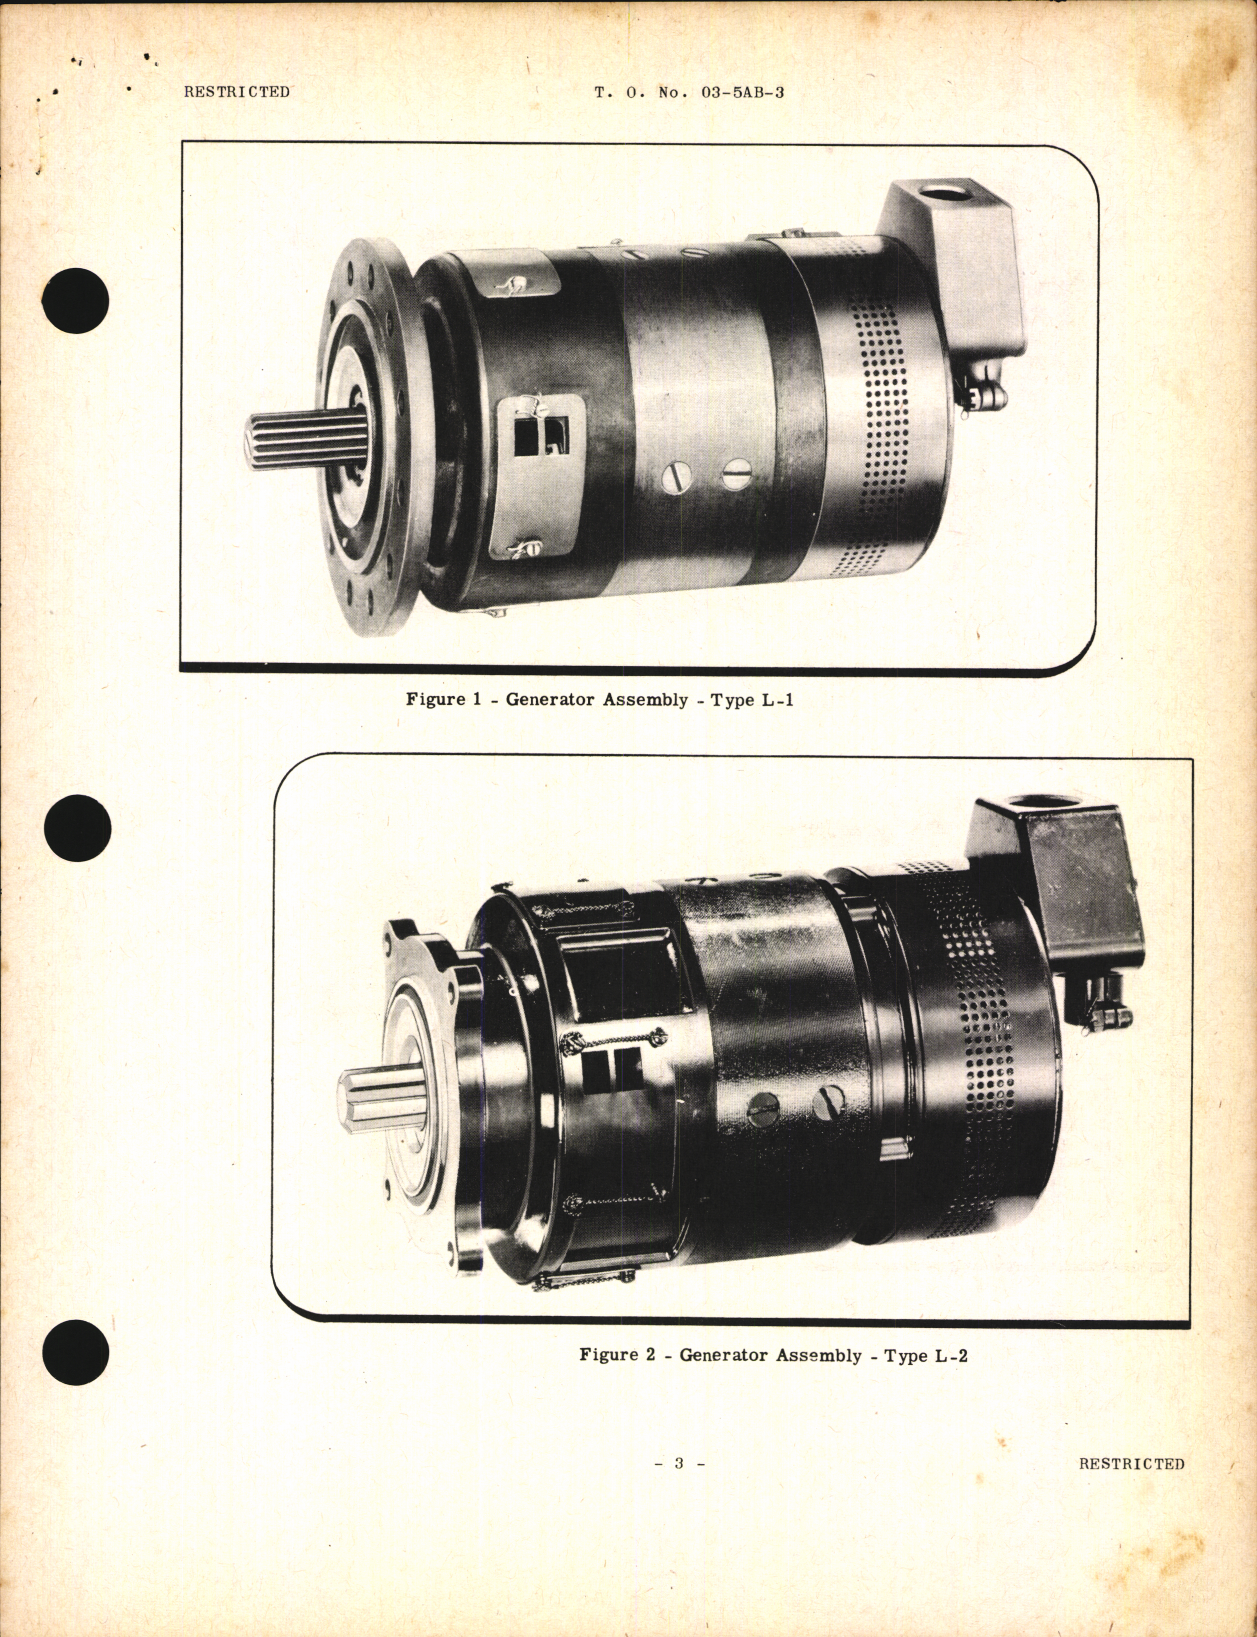 Sample page 5 from AirCorps Library document: Handbook of Instructions with Parts Catalog for Aircraft Generators (24 Volt) Types L-1, L-2, L-3, and M-1